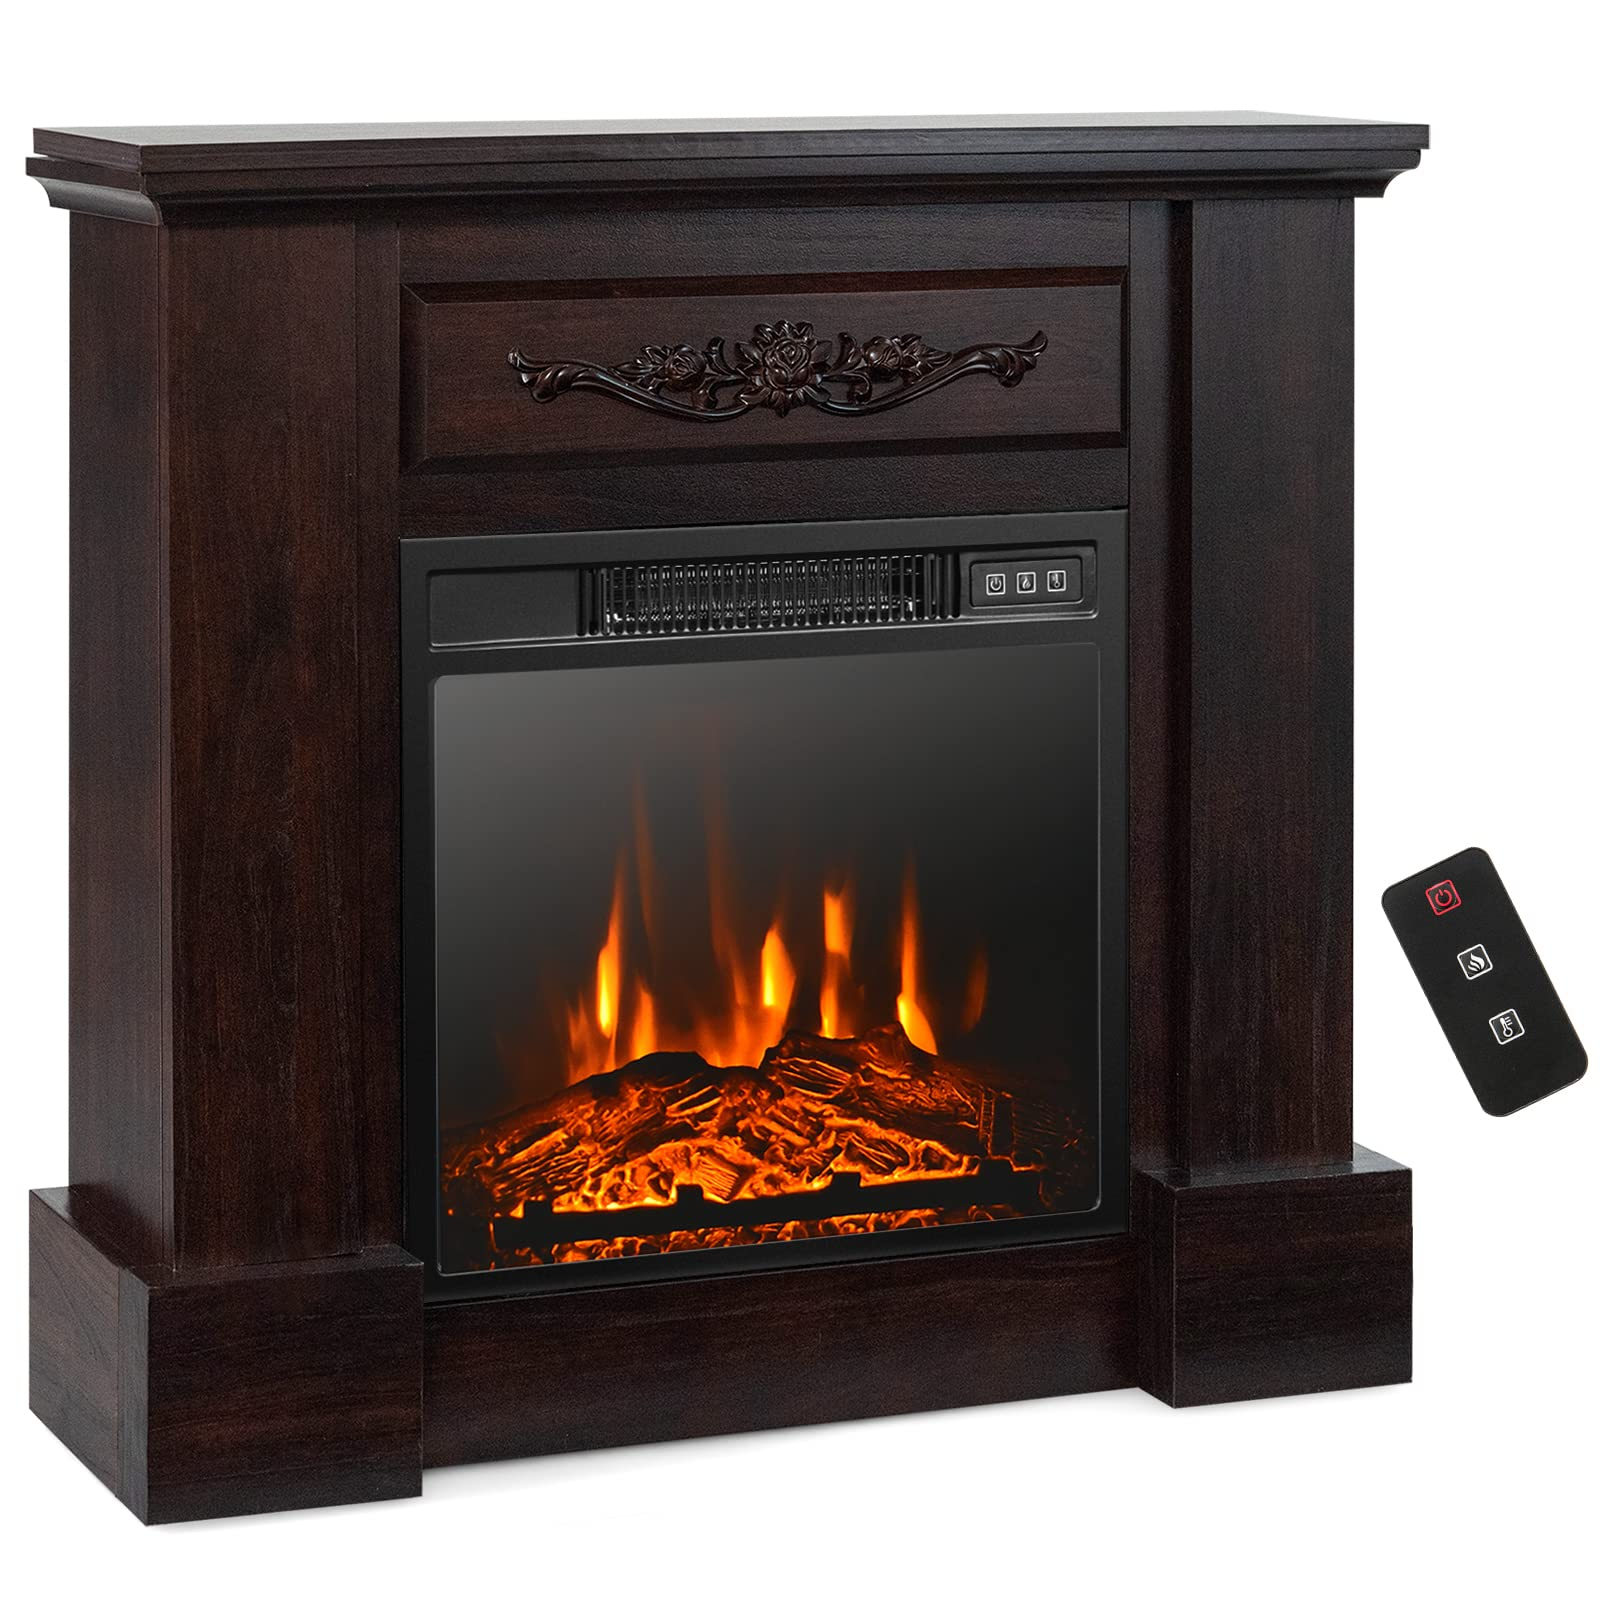 1400W 32 Inches Electric Fireplace with Mantel - Tangkula